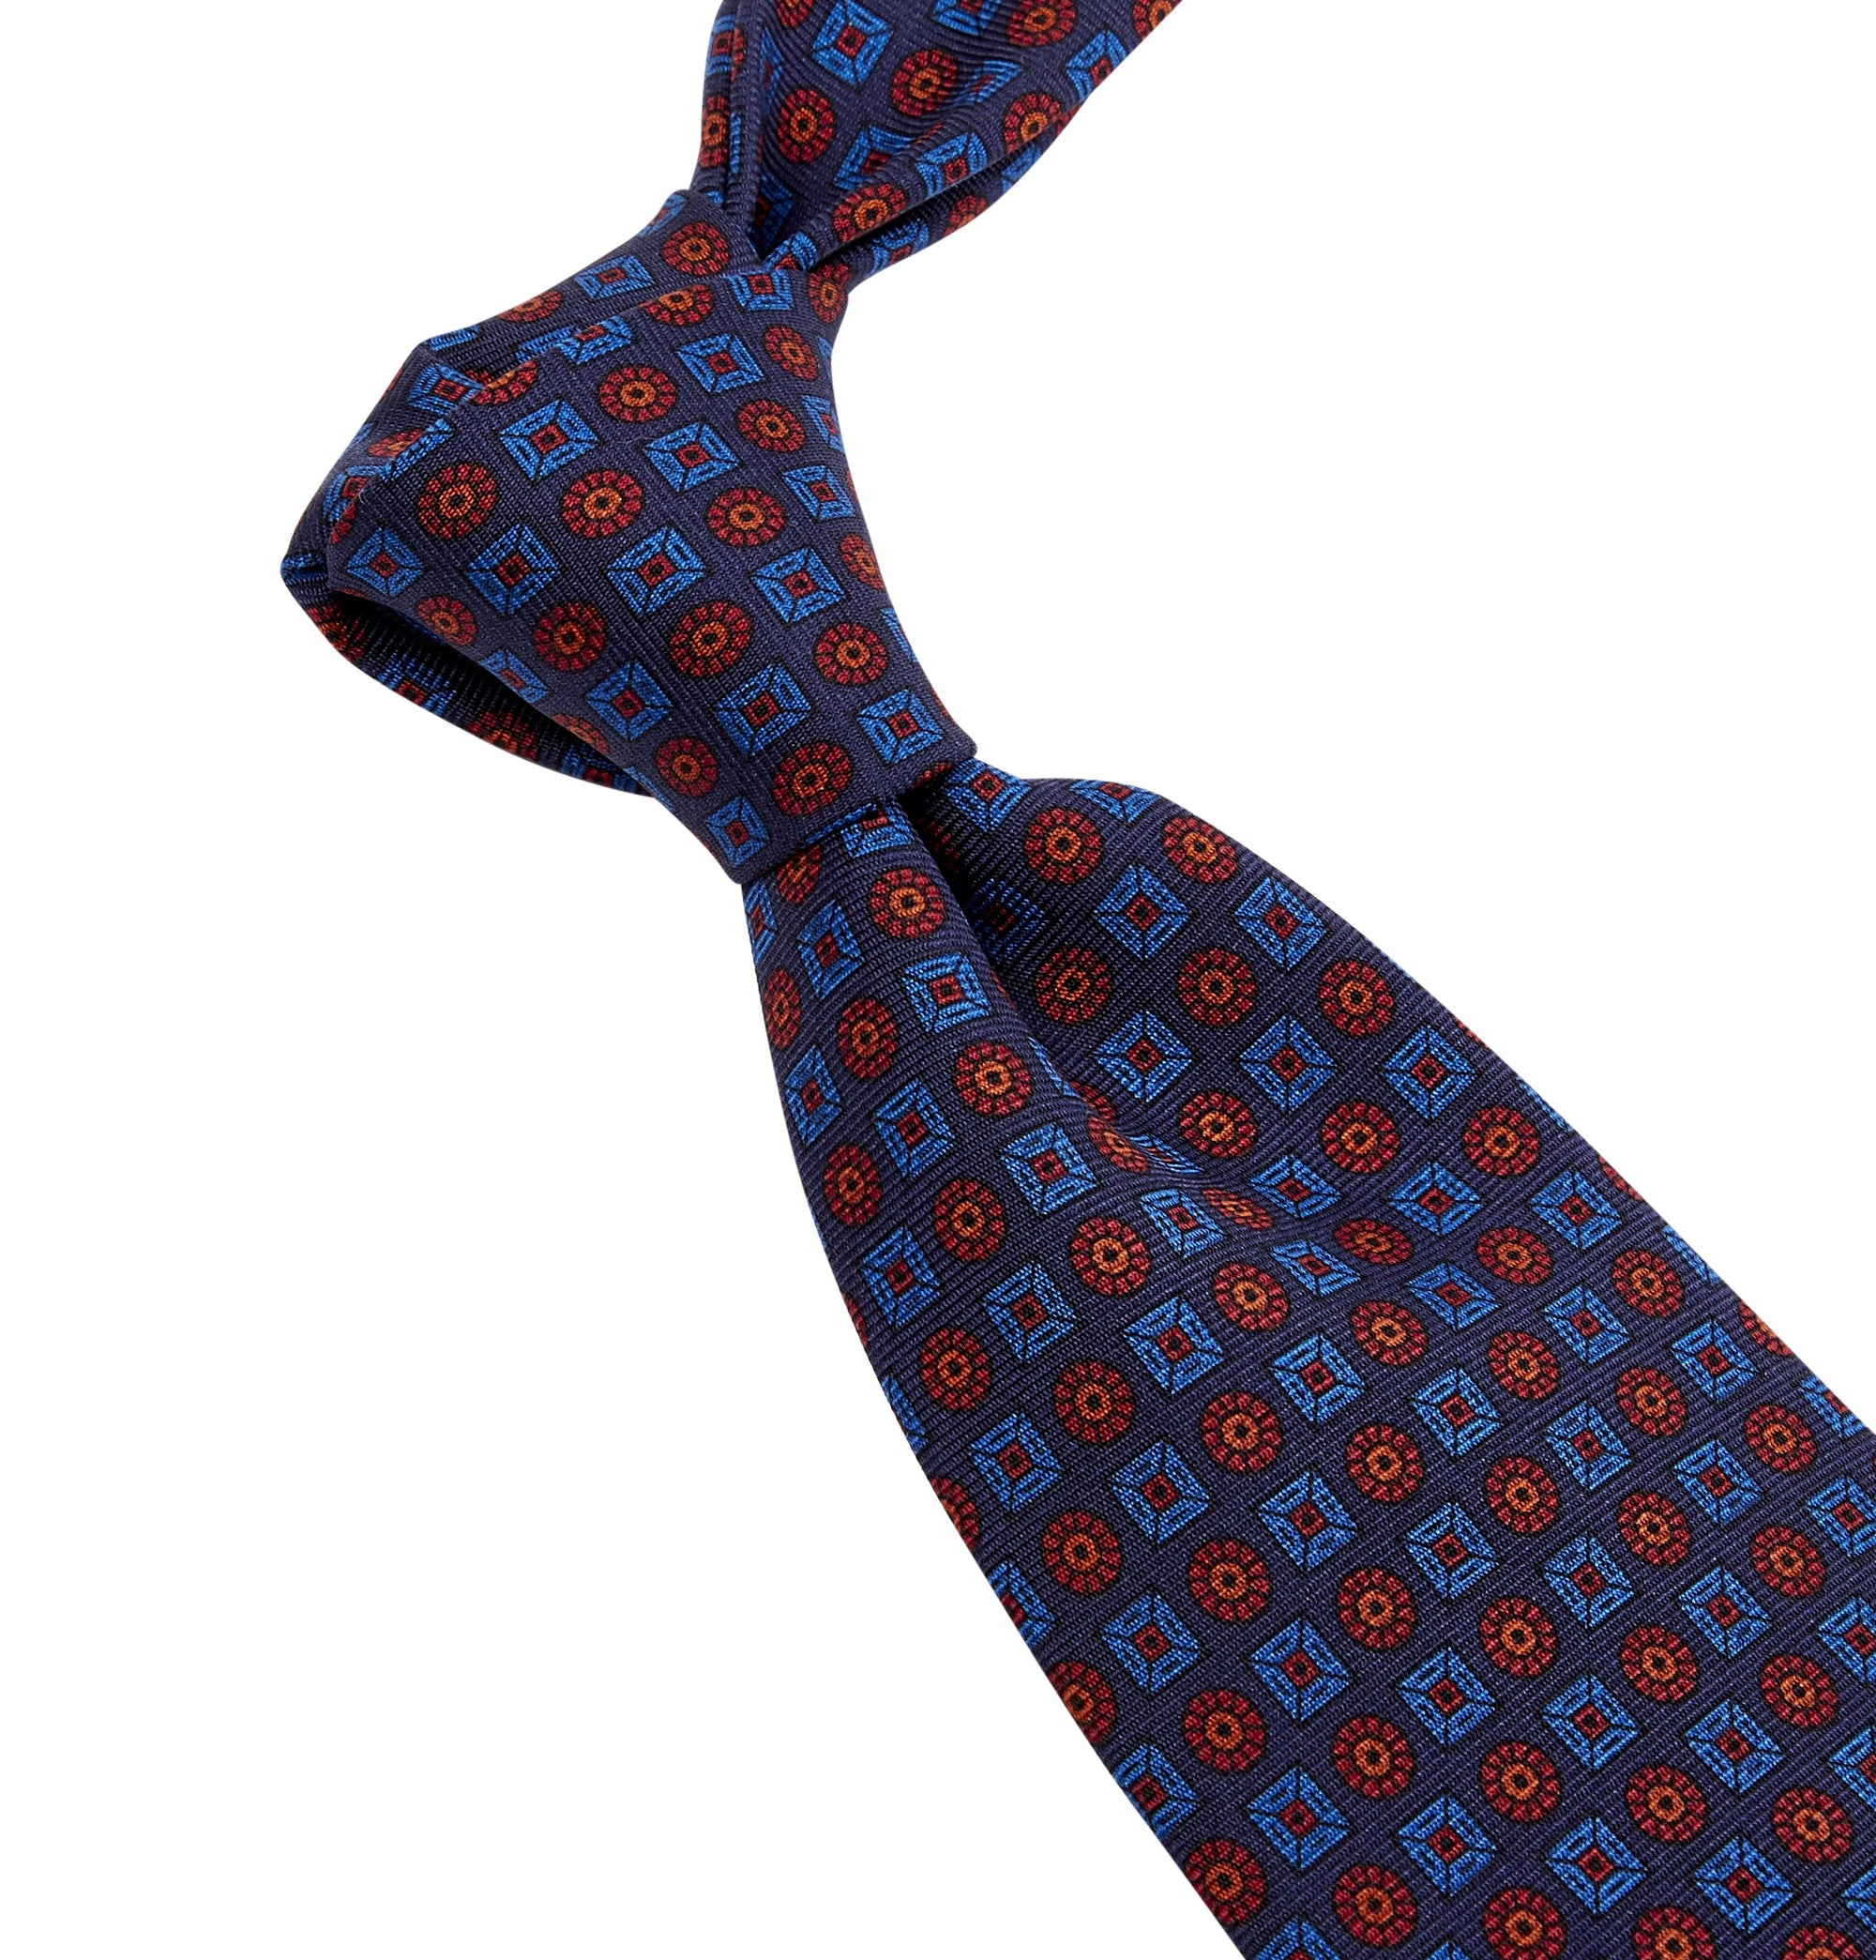 A Sovereign Grade Navy Ancient Madder Tie from KirbyAllison.com, with a blue and red pattern, crafted from 100% English silk.